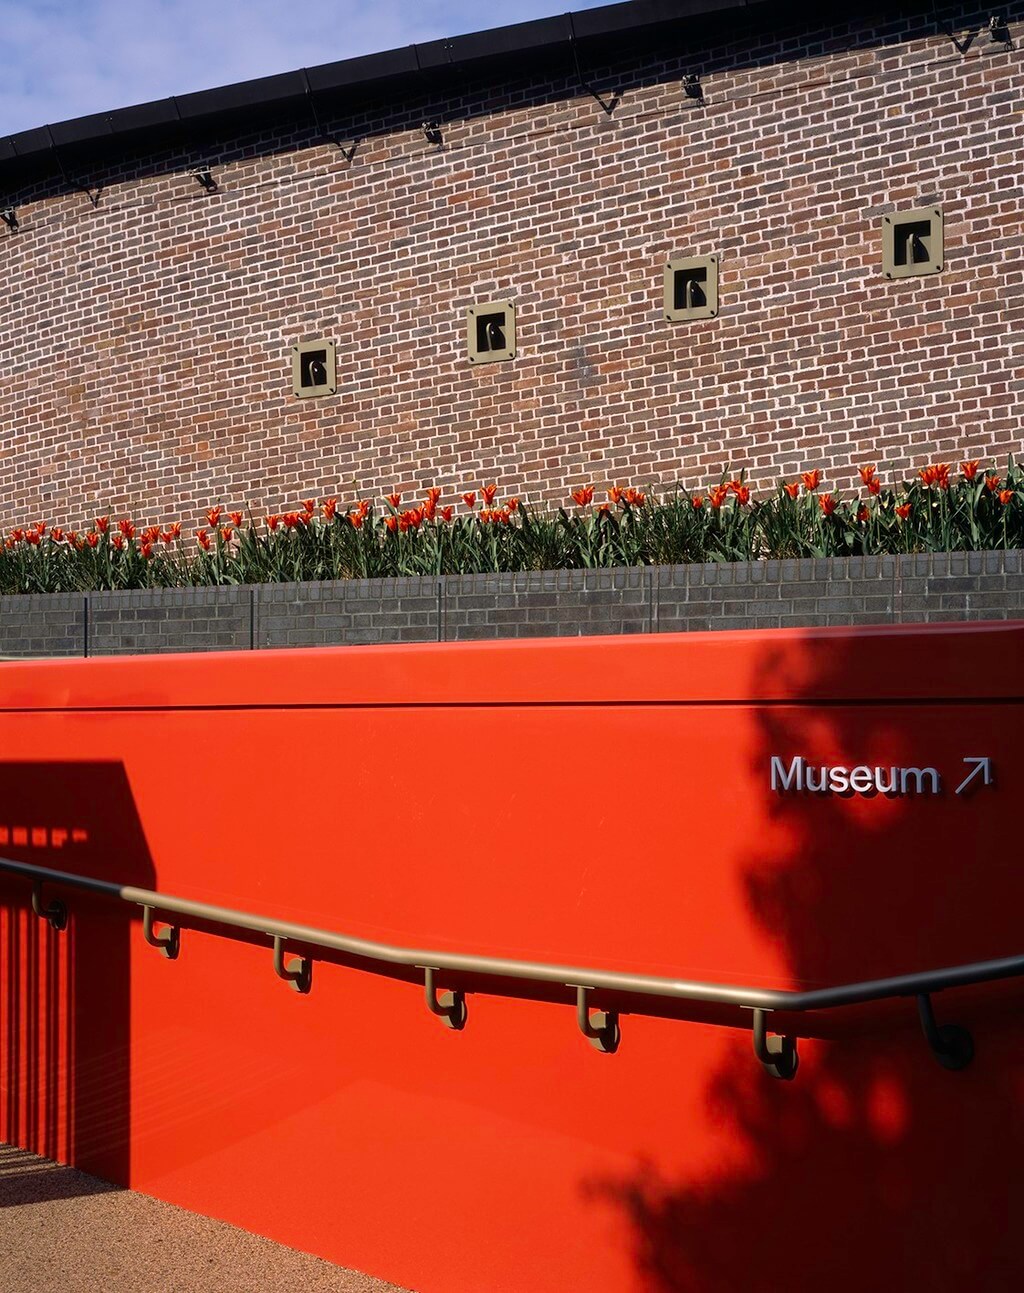 A red wall with a sign that says museum on it
